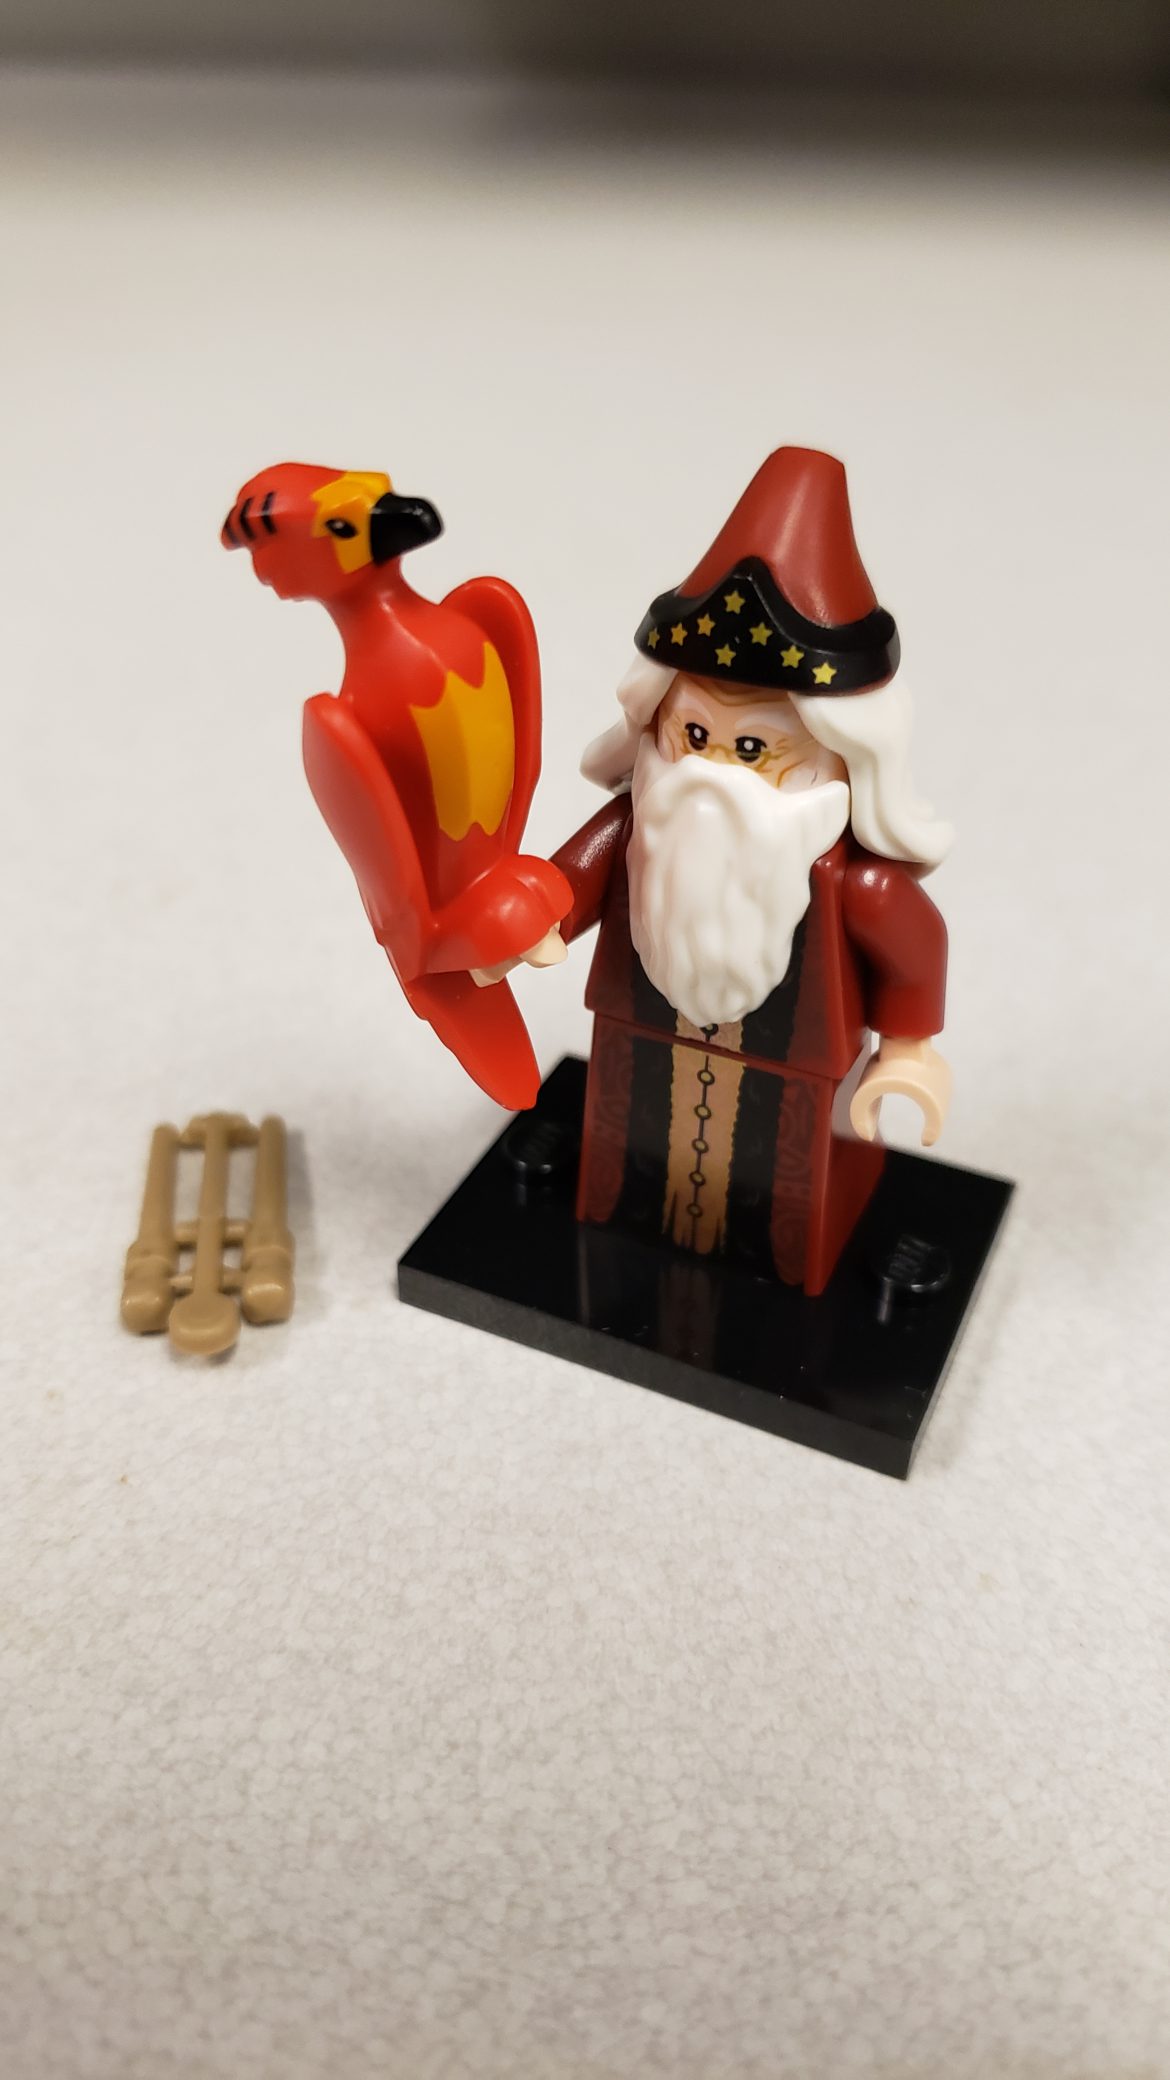 Lego Harry Potter Minifigures Series 2 Mini Review (Favorite Characters)